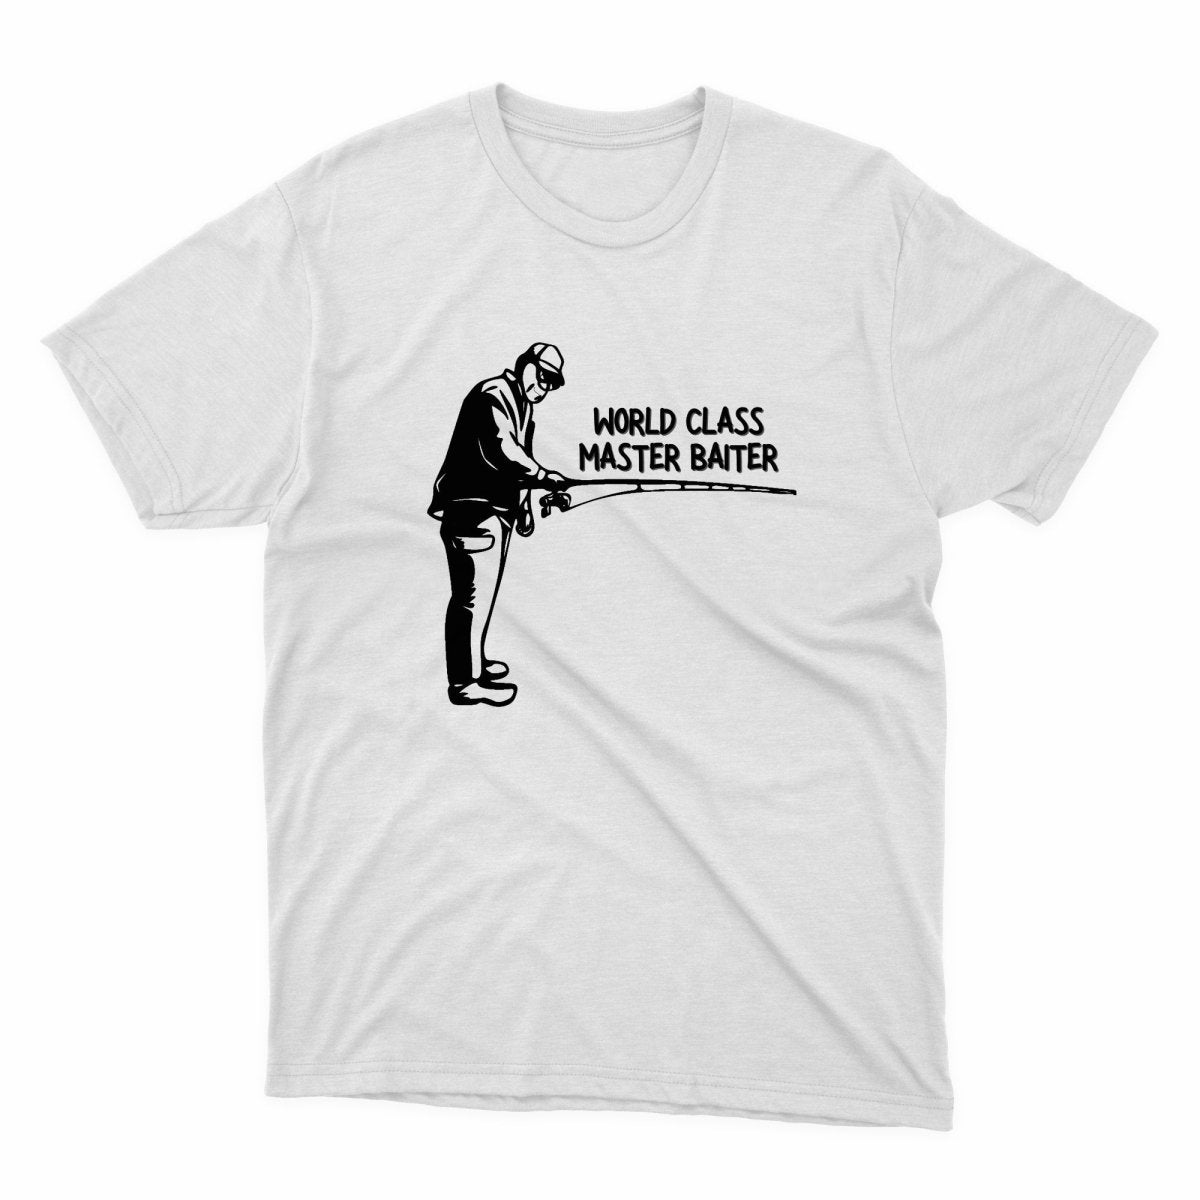 Master Baiter Guy Shirt - stickerbullMaster Baiter Guy ShirtShirtsPrintifystickerbull61281592084665356591WhiteSa white t - shirt with a black and white image of a man holding a